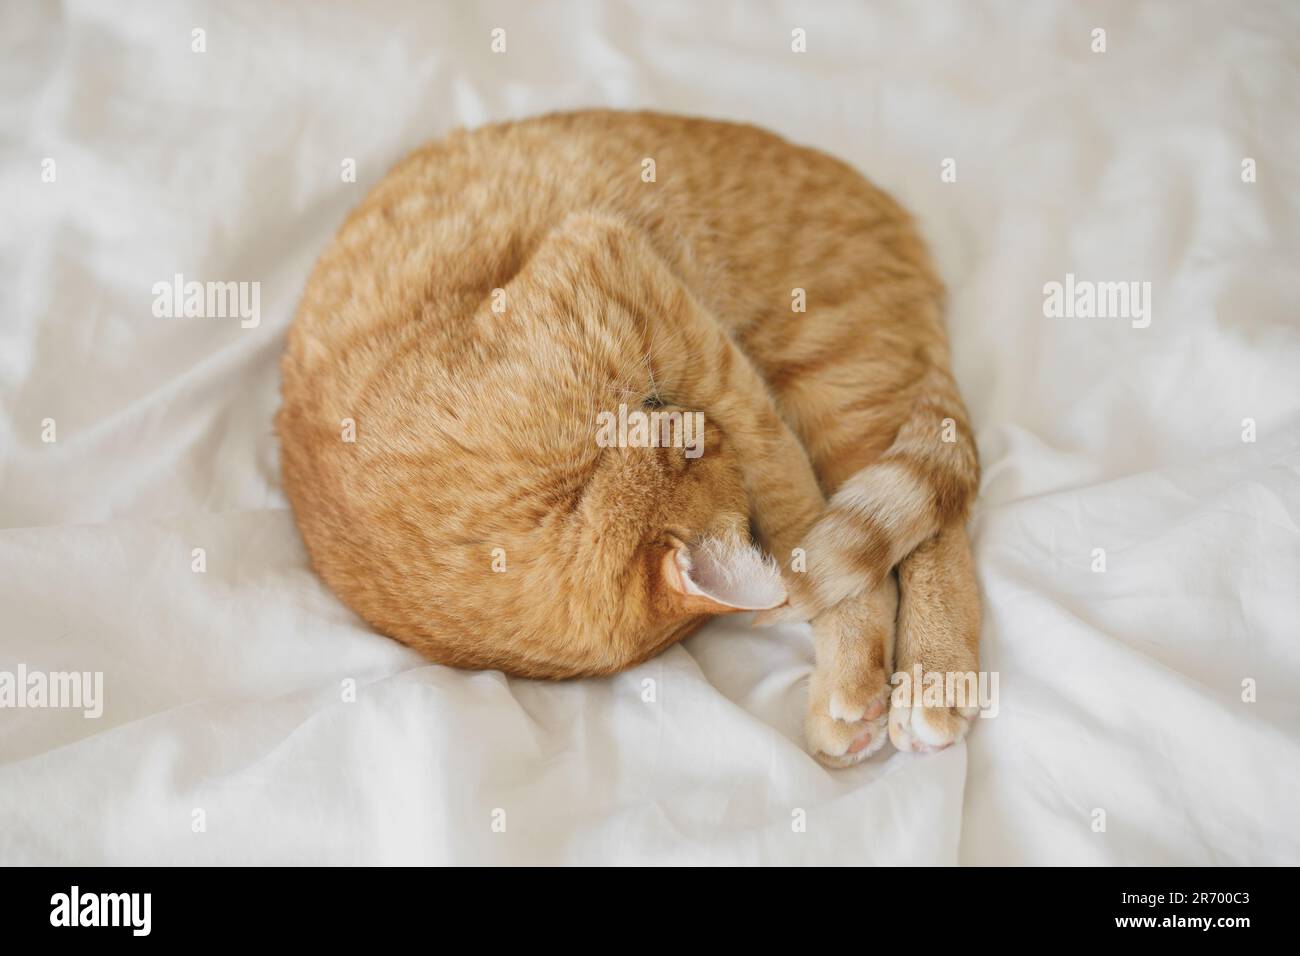 Curled up ginger cat peacefully slumbering on a pristine white bedsheet, with its nose adorably tucked away Stock Photo